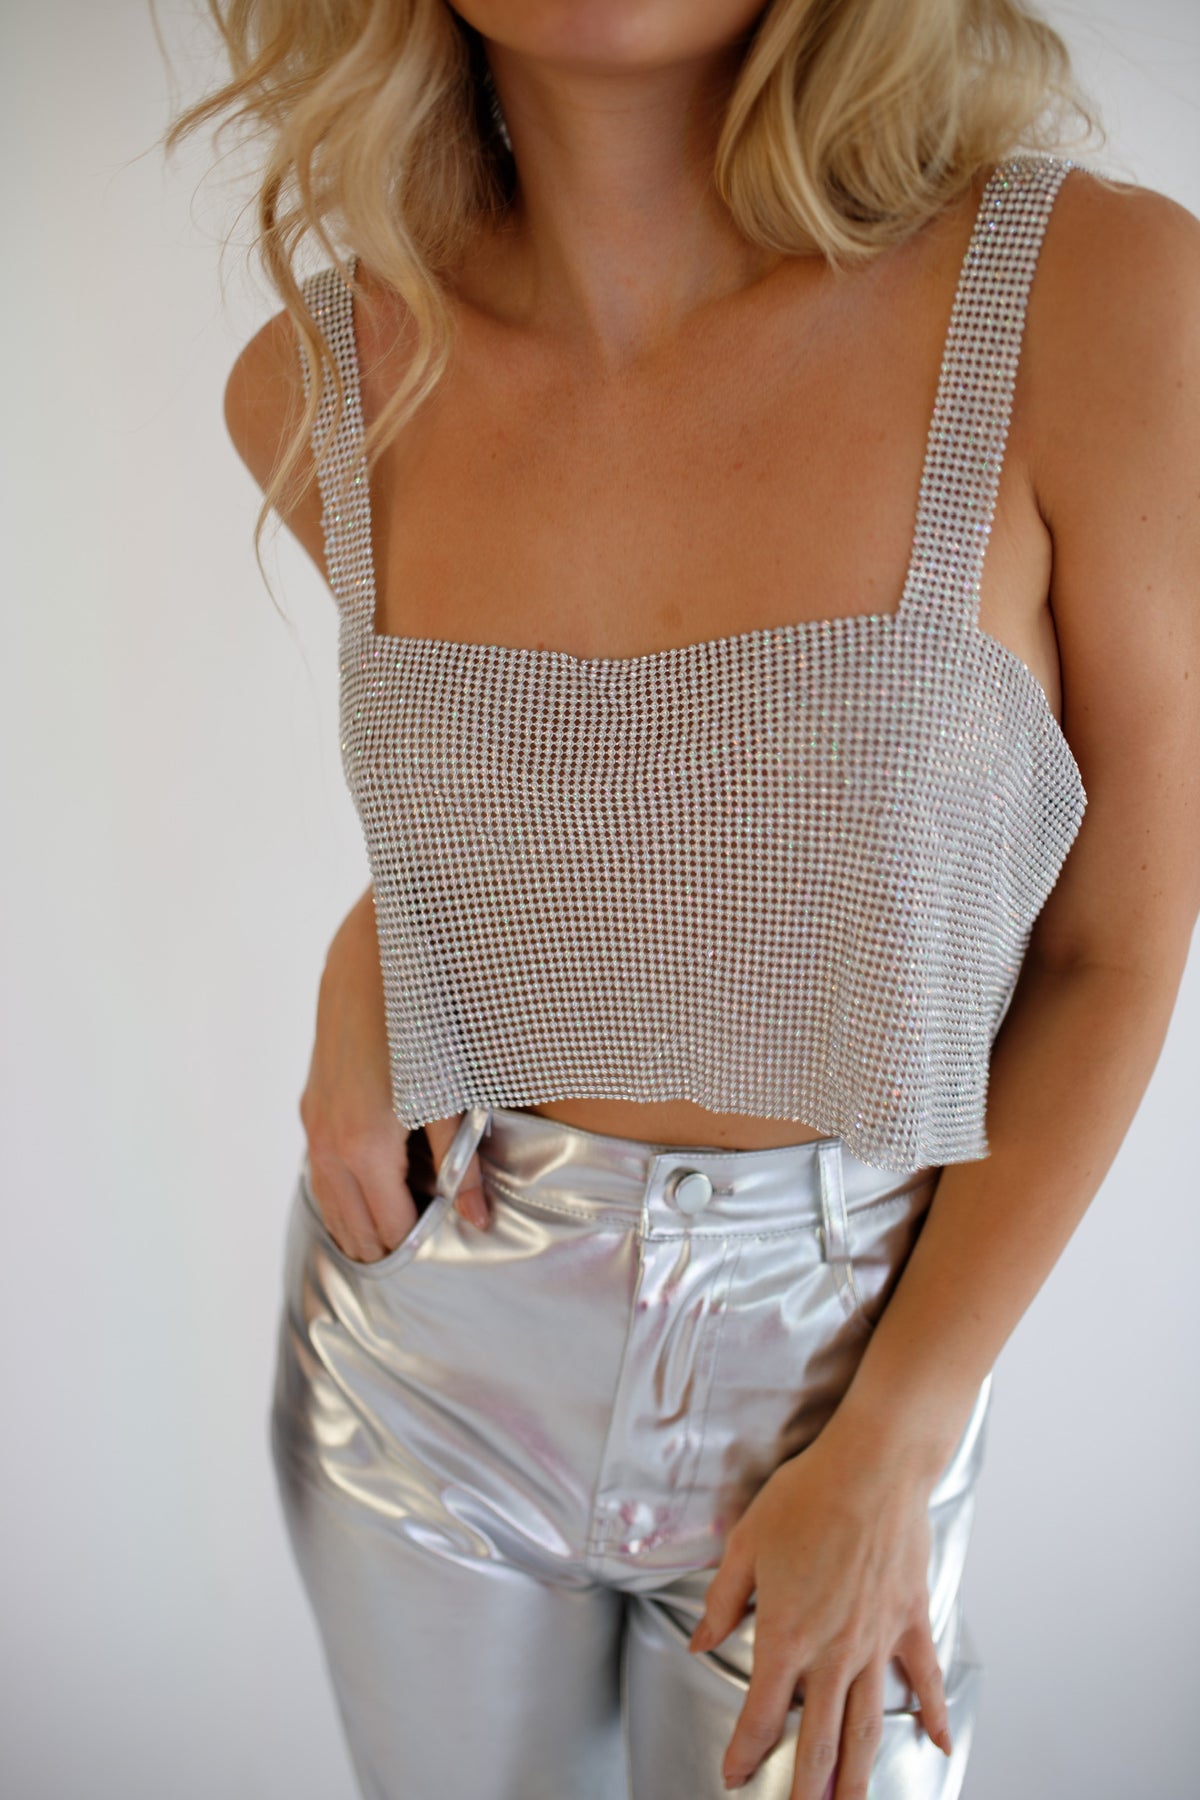 Rhinestone Chainmail Crop in Silver